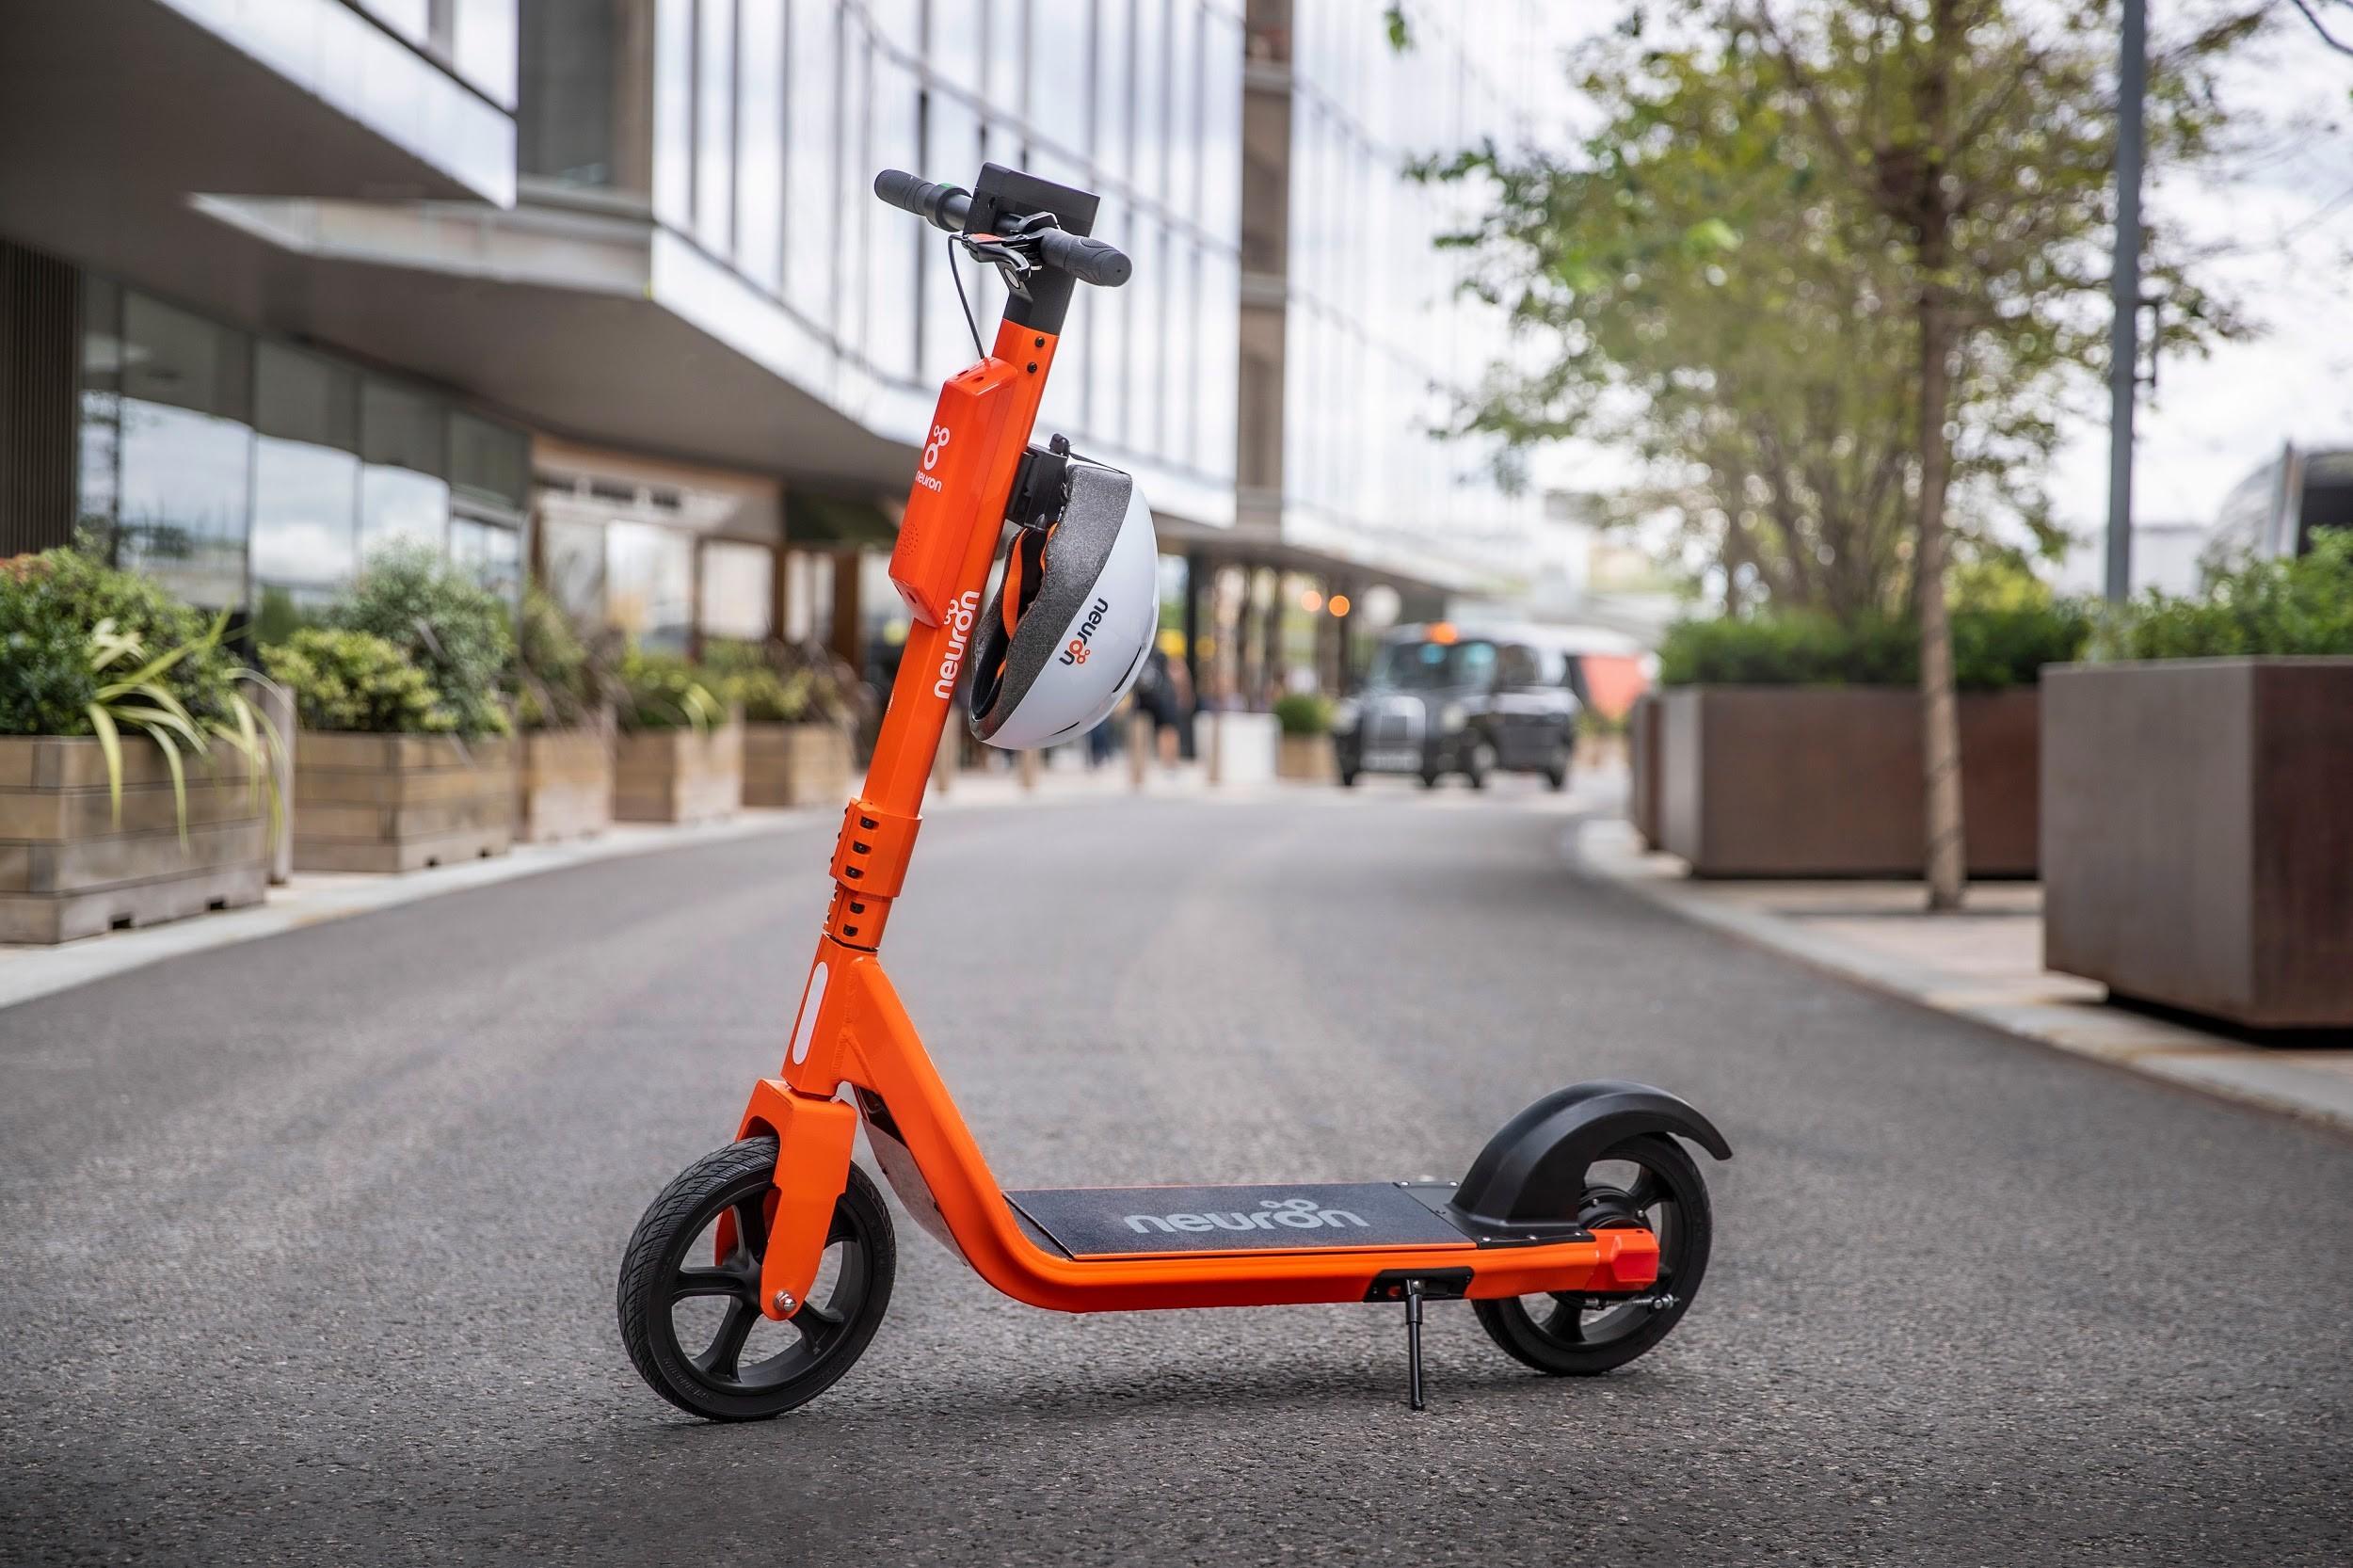 Photo showing an orange e-scooter